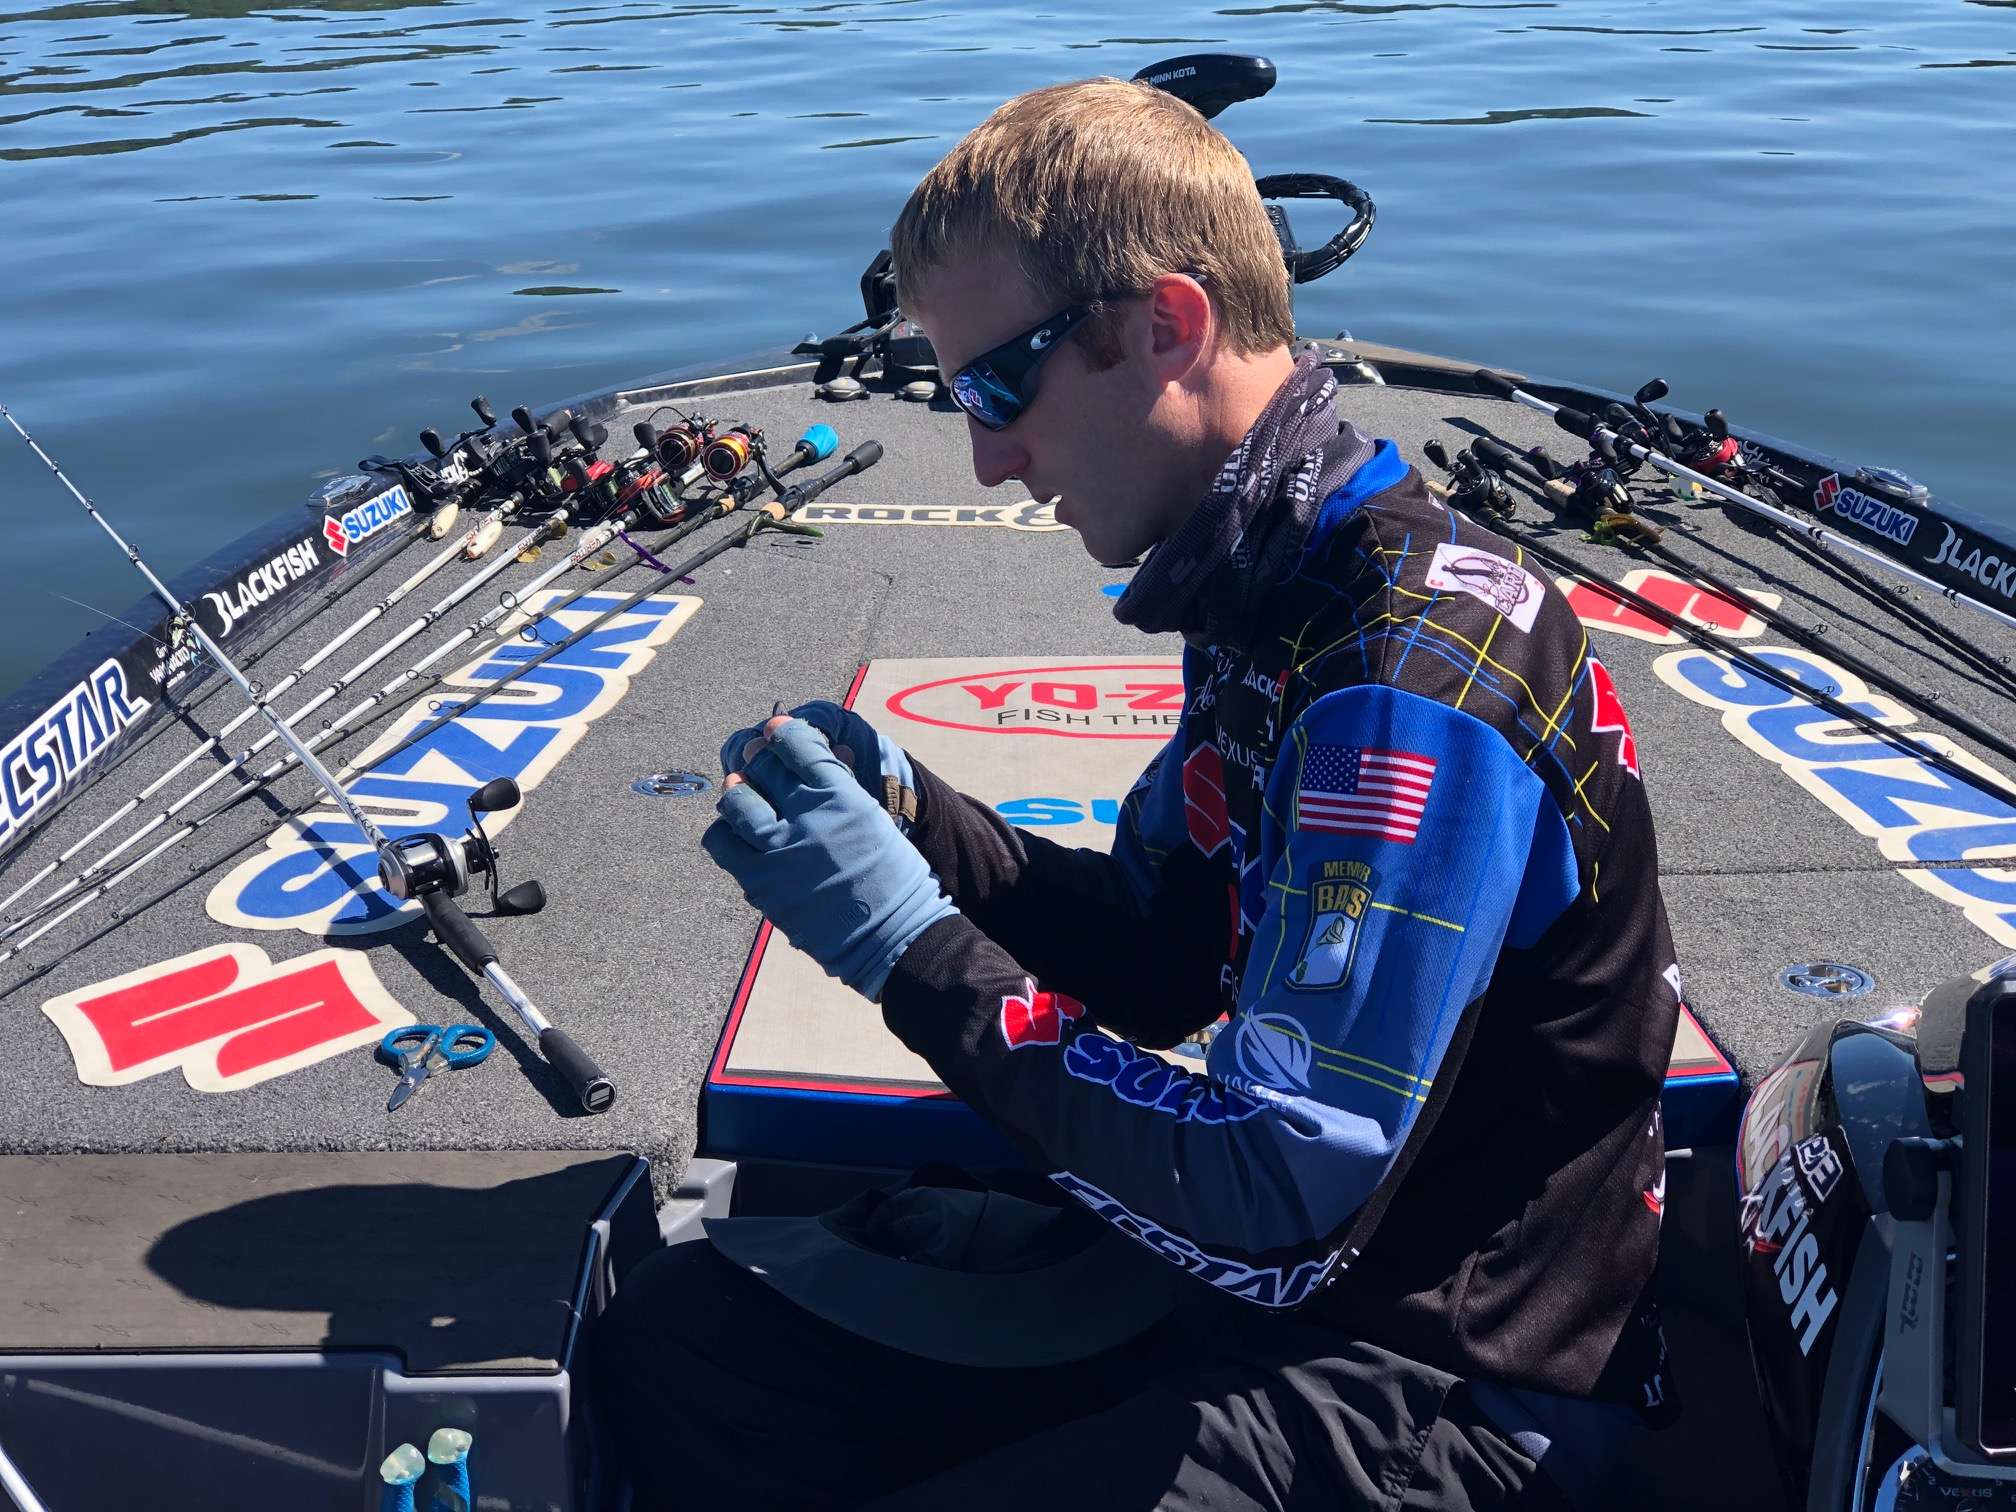 After making two small culls, Brandon Card is making a couple of bait adjustments in an effort to land a big bite. Card, fishing his 9th season on the Bassmaster Elite Series has spent the majority of his day in one area, a long flat in which the bass are moving about. Card has caught the majority of his fish here and seems content with riding this spot to the end where heâs one big bite away from punching his ticket to Championship Saturday.